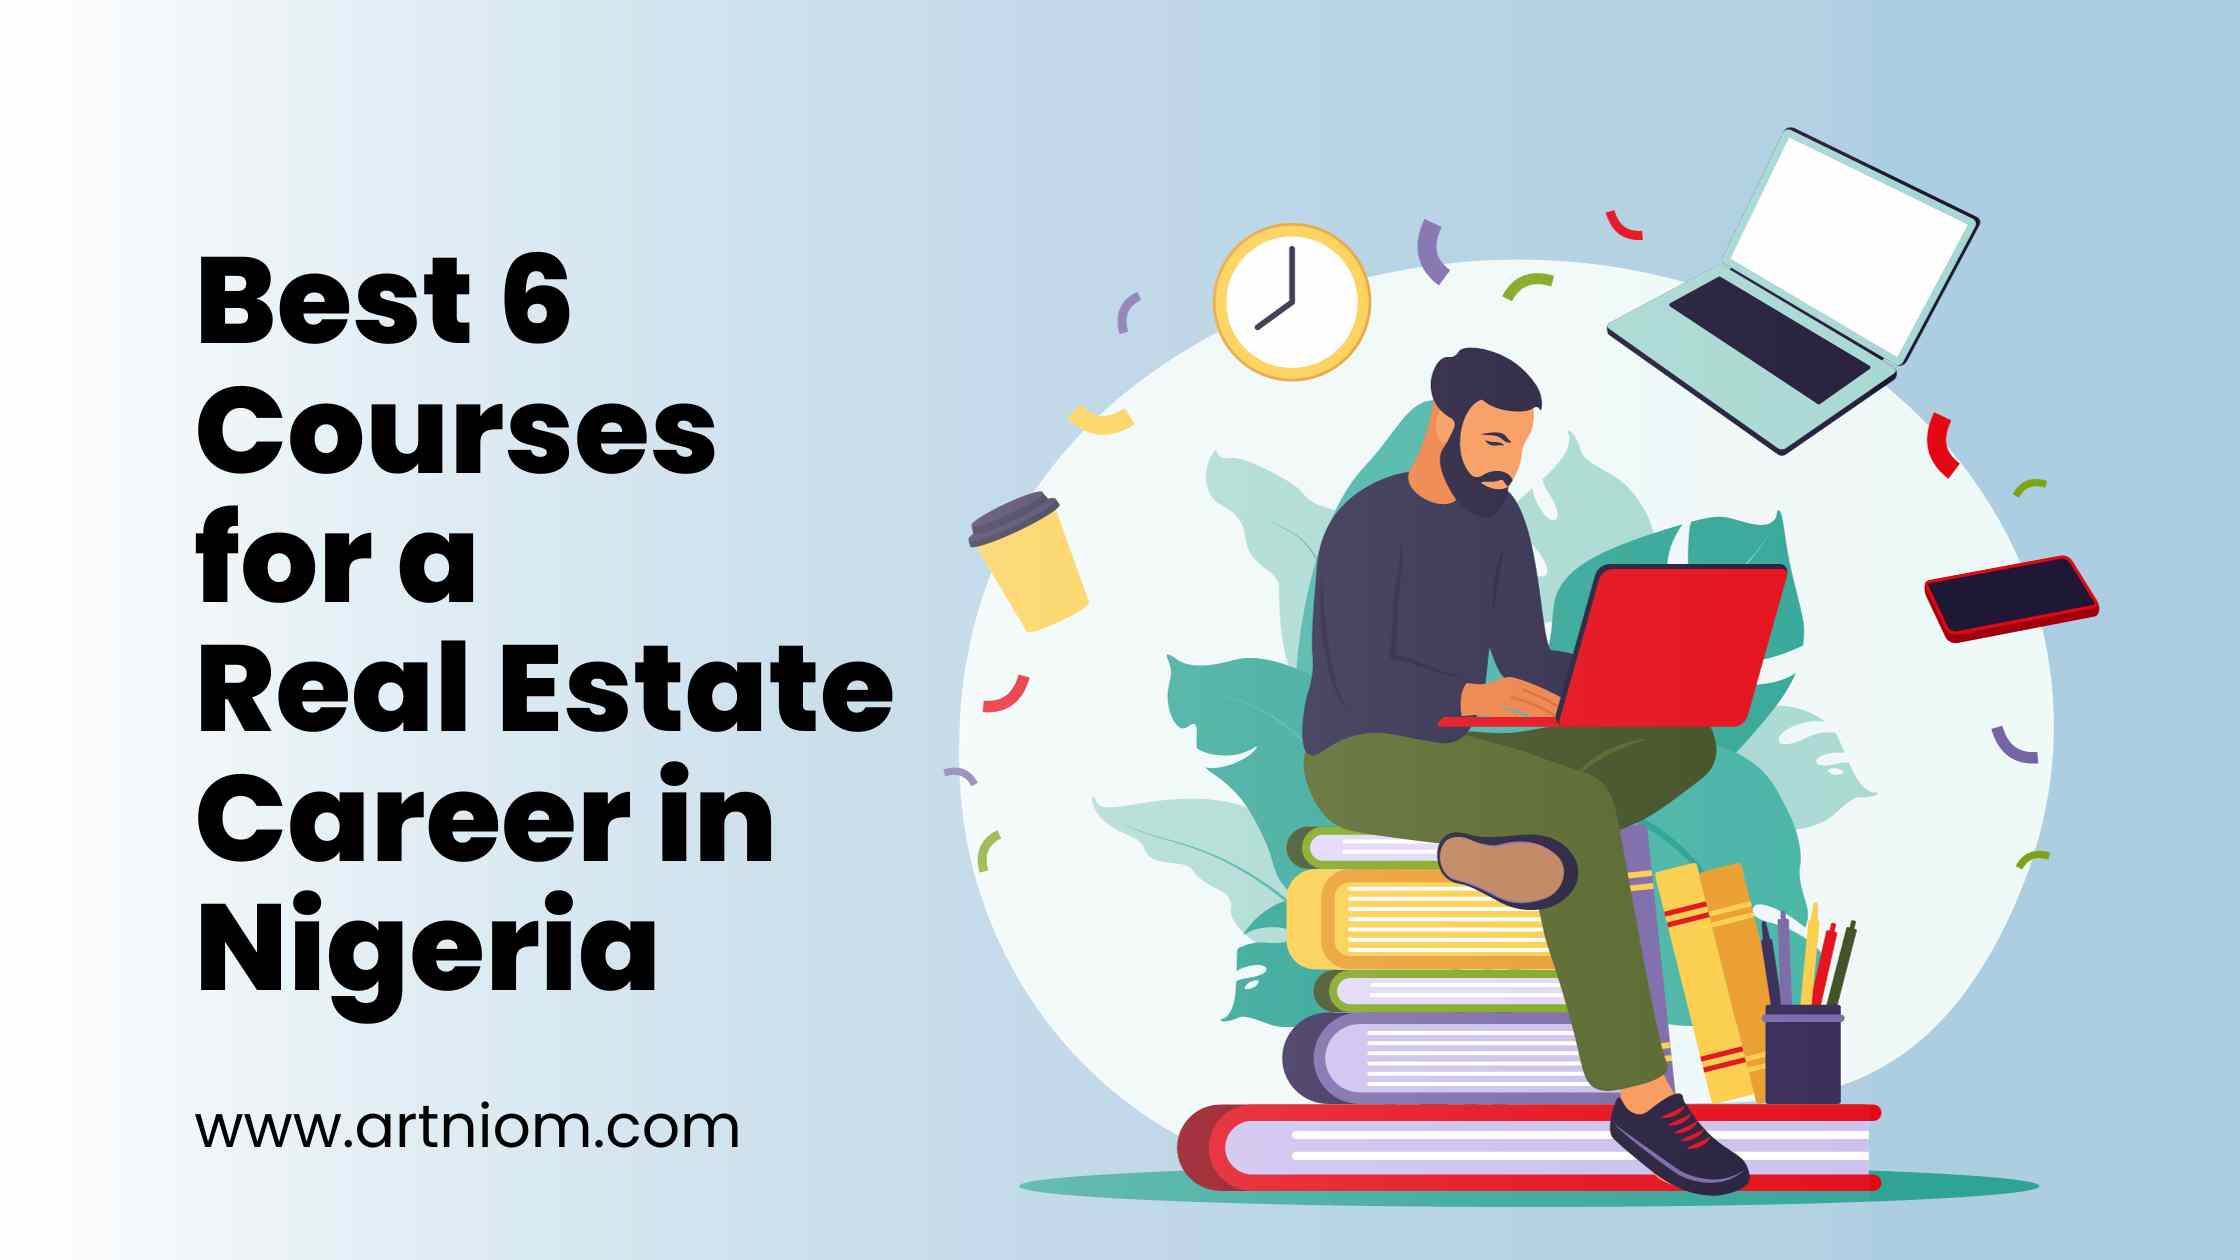 You are currently viewing Best 6 Courses for a Real Estate Career in Nigeria